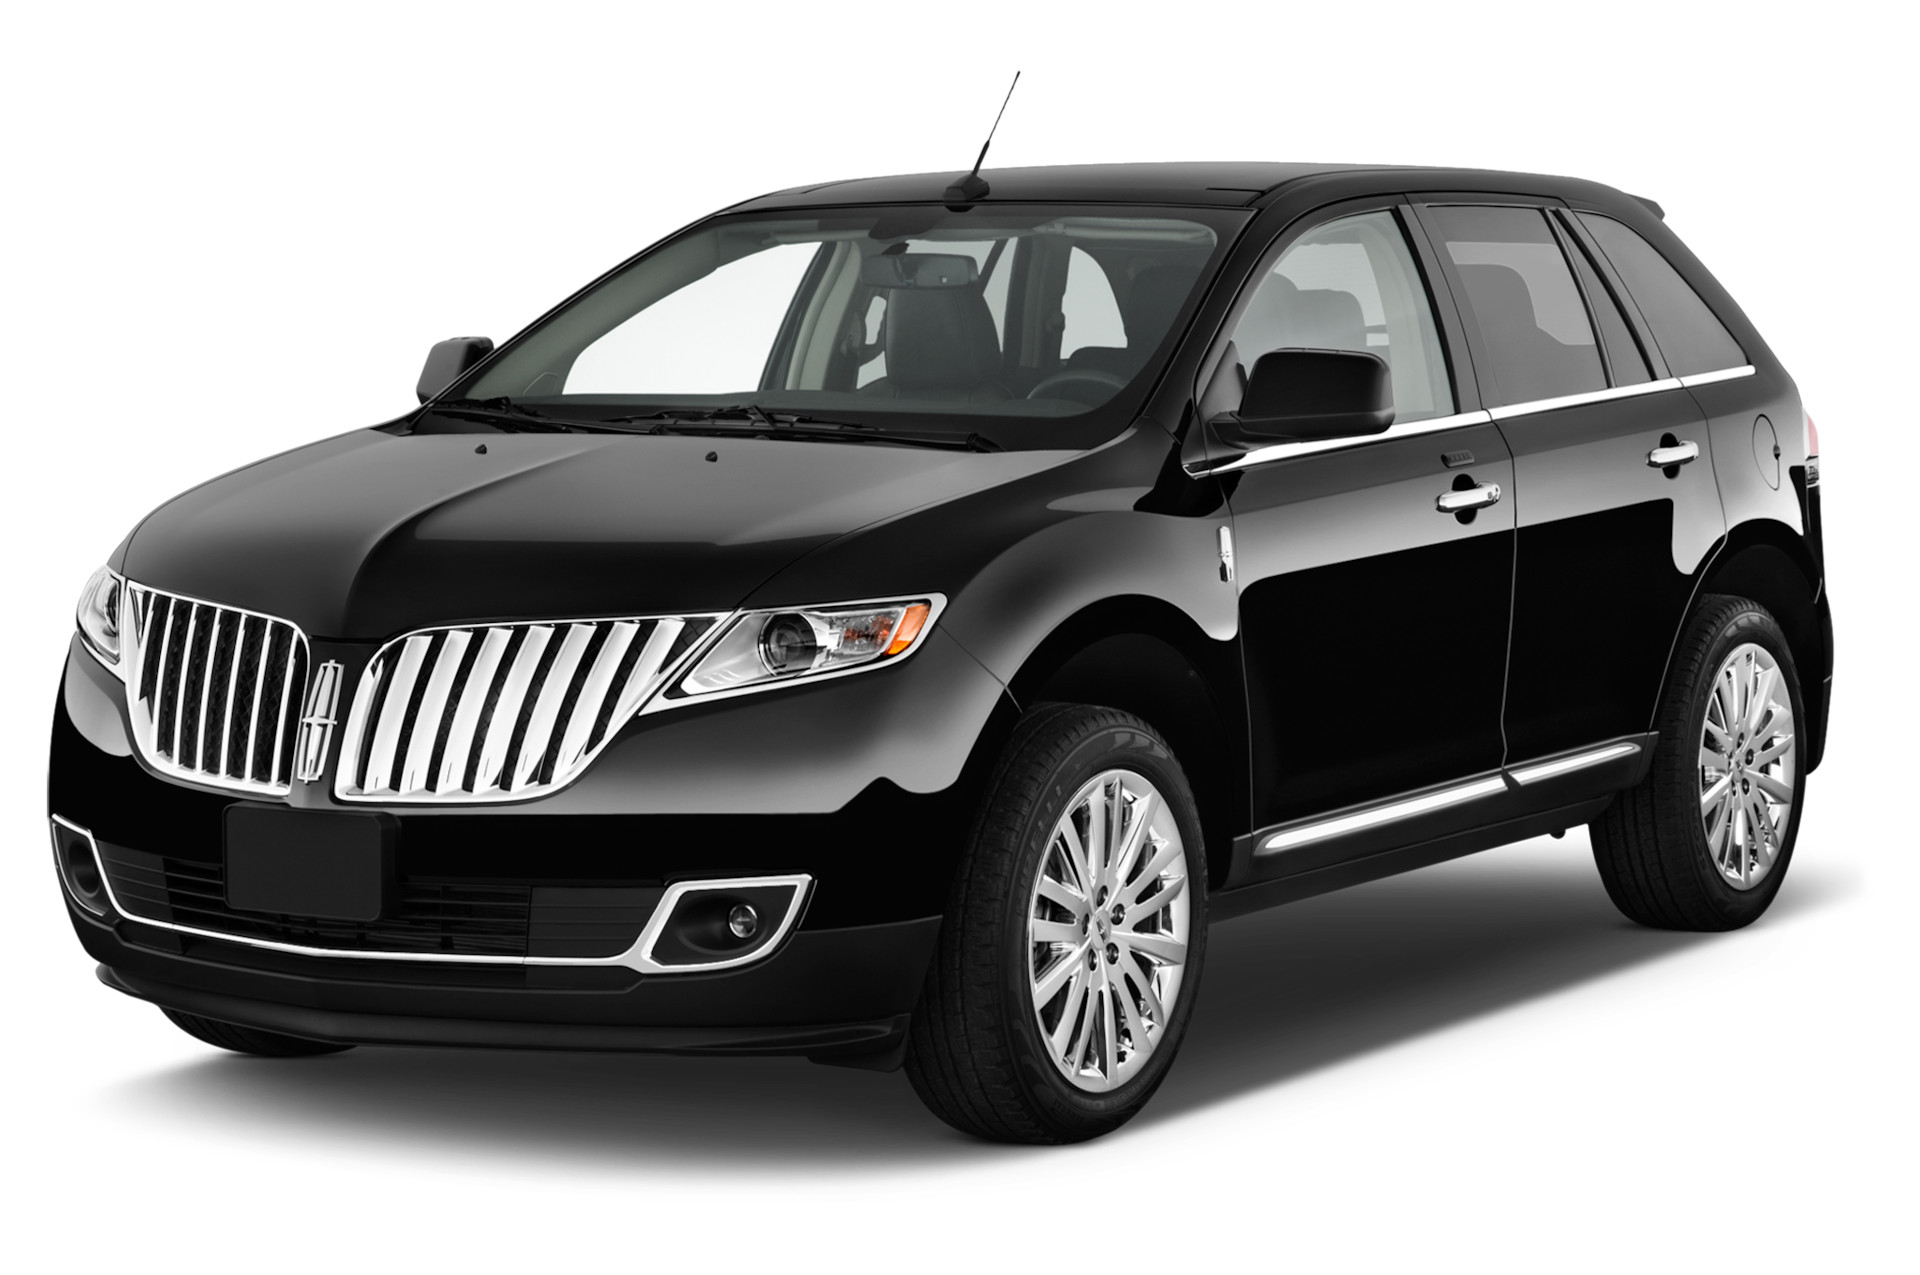 2013 Lincoln MKX Prices, Reviews, and Photos - MotorTrend